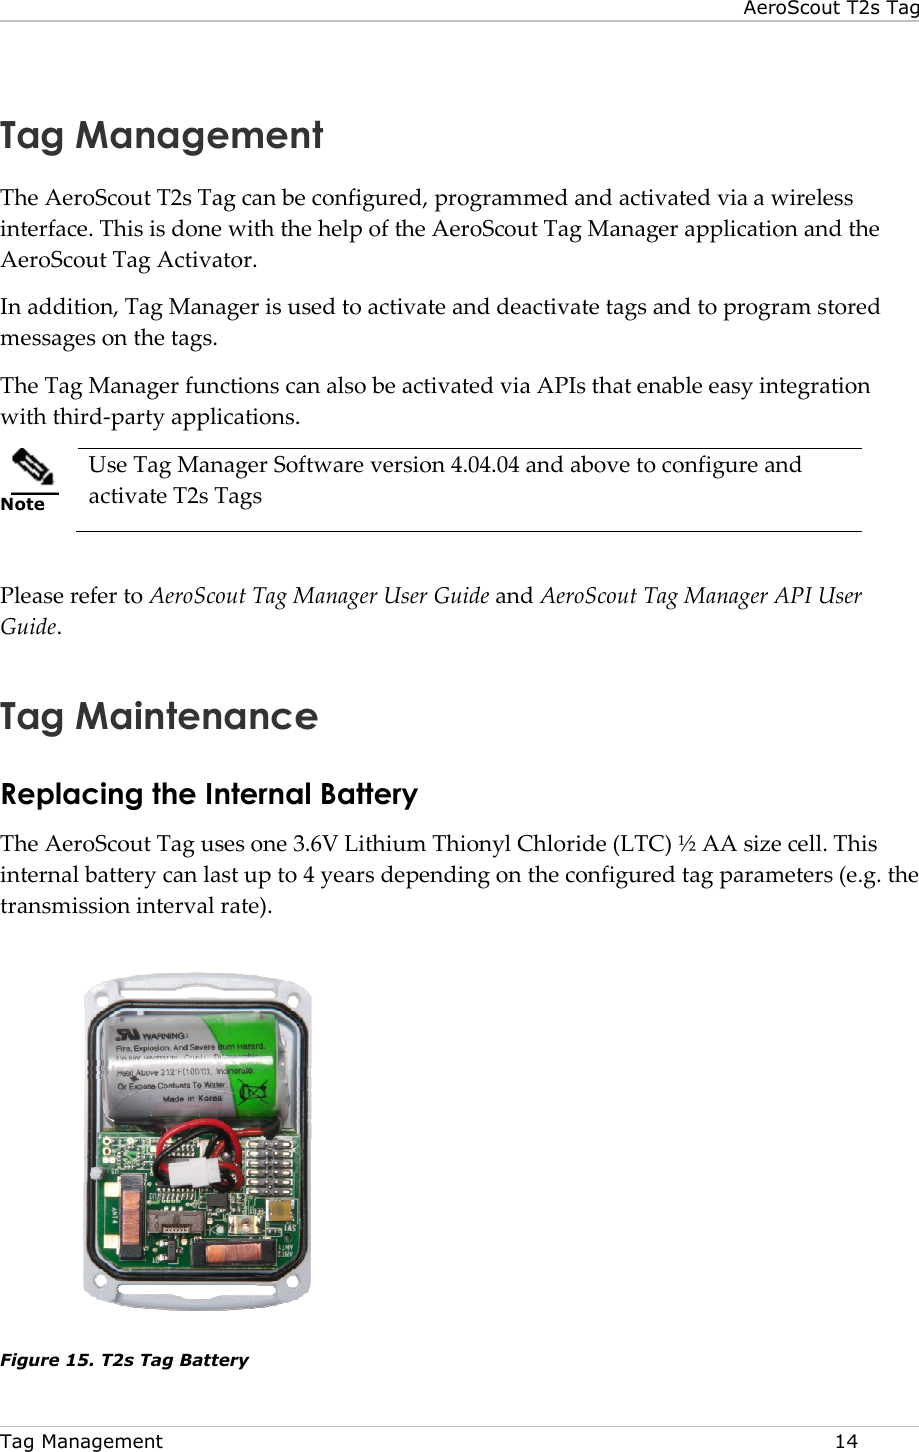 Tag Management    Tag ManagementThe AeroScout T2s Tag can be configured, programmed and activated via a wireless interface. This is done with the help of the AeroScout Tag Manager application and the AeroScout Tag Activator. In addition, Tag Manager is used to activate and deactivate tags and to program messages on the tags.  The Tag Manager functions can also be activated via APIs that enable easy integration with third-party applications.   Note Use Tag Manager Software version 4.04.04 and above to configure and activate T2s Tags   Please refer to AeroScout Tag Manager User Guide Guide.  Tag MaintenanceReplacing the Internal BatteryThe AeroScout Tag uses one 3internal battery can last up to 4 years depending on the configured tag parameters (e.g. the transmission interval rate).  Figure 15. T2s Tag Battery AeroScout T2s TagTag Management Tag can be configured, programmed and activated via a wireless interface. This is done with the help of the AeroScout Tag Manager application and the In addition, Tag Manager is used to activate and deactivate tags and to program The Tag Manager functions can also be activated via APIs that enable easy integration party applications. Use Tag Manager Software version 4.04.04 and above to configure and AeroScout Tag Manager User Guide and AeroScout Tag Manager API User Tag Maintenance Replacing the Internal Battery The AeroScout Tag uses one 3.6V Lithium Thionyl Chloride (LTC) ½ AA size cell. This internal battery can last up to 4 years depending on the configured tag parameters (e.g. the  AeroScout T2s Tag  14 Tag can be configured, programmed and activated via a wireless interface. This is done with the help of the AeroScout Tag Manager application and the In addition, Tag Manager is used to activate and deactivate tags and to program stored The Tag Manager functions can also be activated via APIs that enable easy integration Use Tag Manager Software version 4.04.04 and above to configure and AeroScout Tag Manager API User .6V Lithium Thionyl Chloride (LTC) ½ AA size cell. This internal battery can last up to 4 years depending on the configured tag parameters (e.g. the 